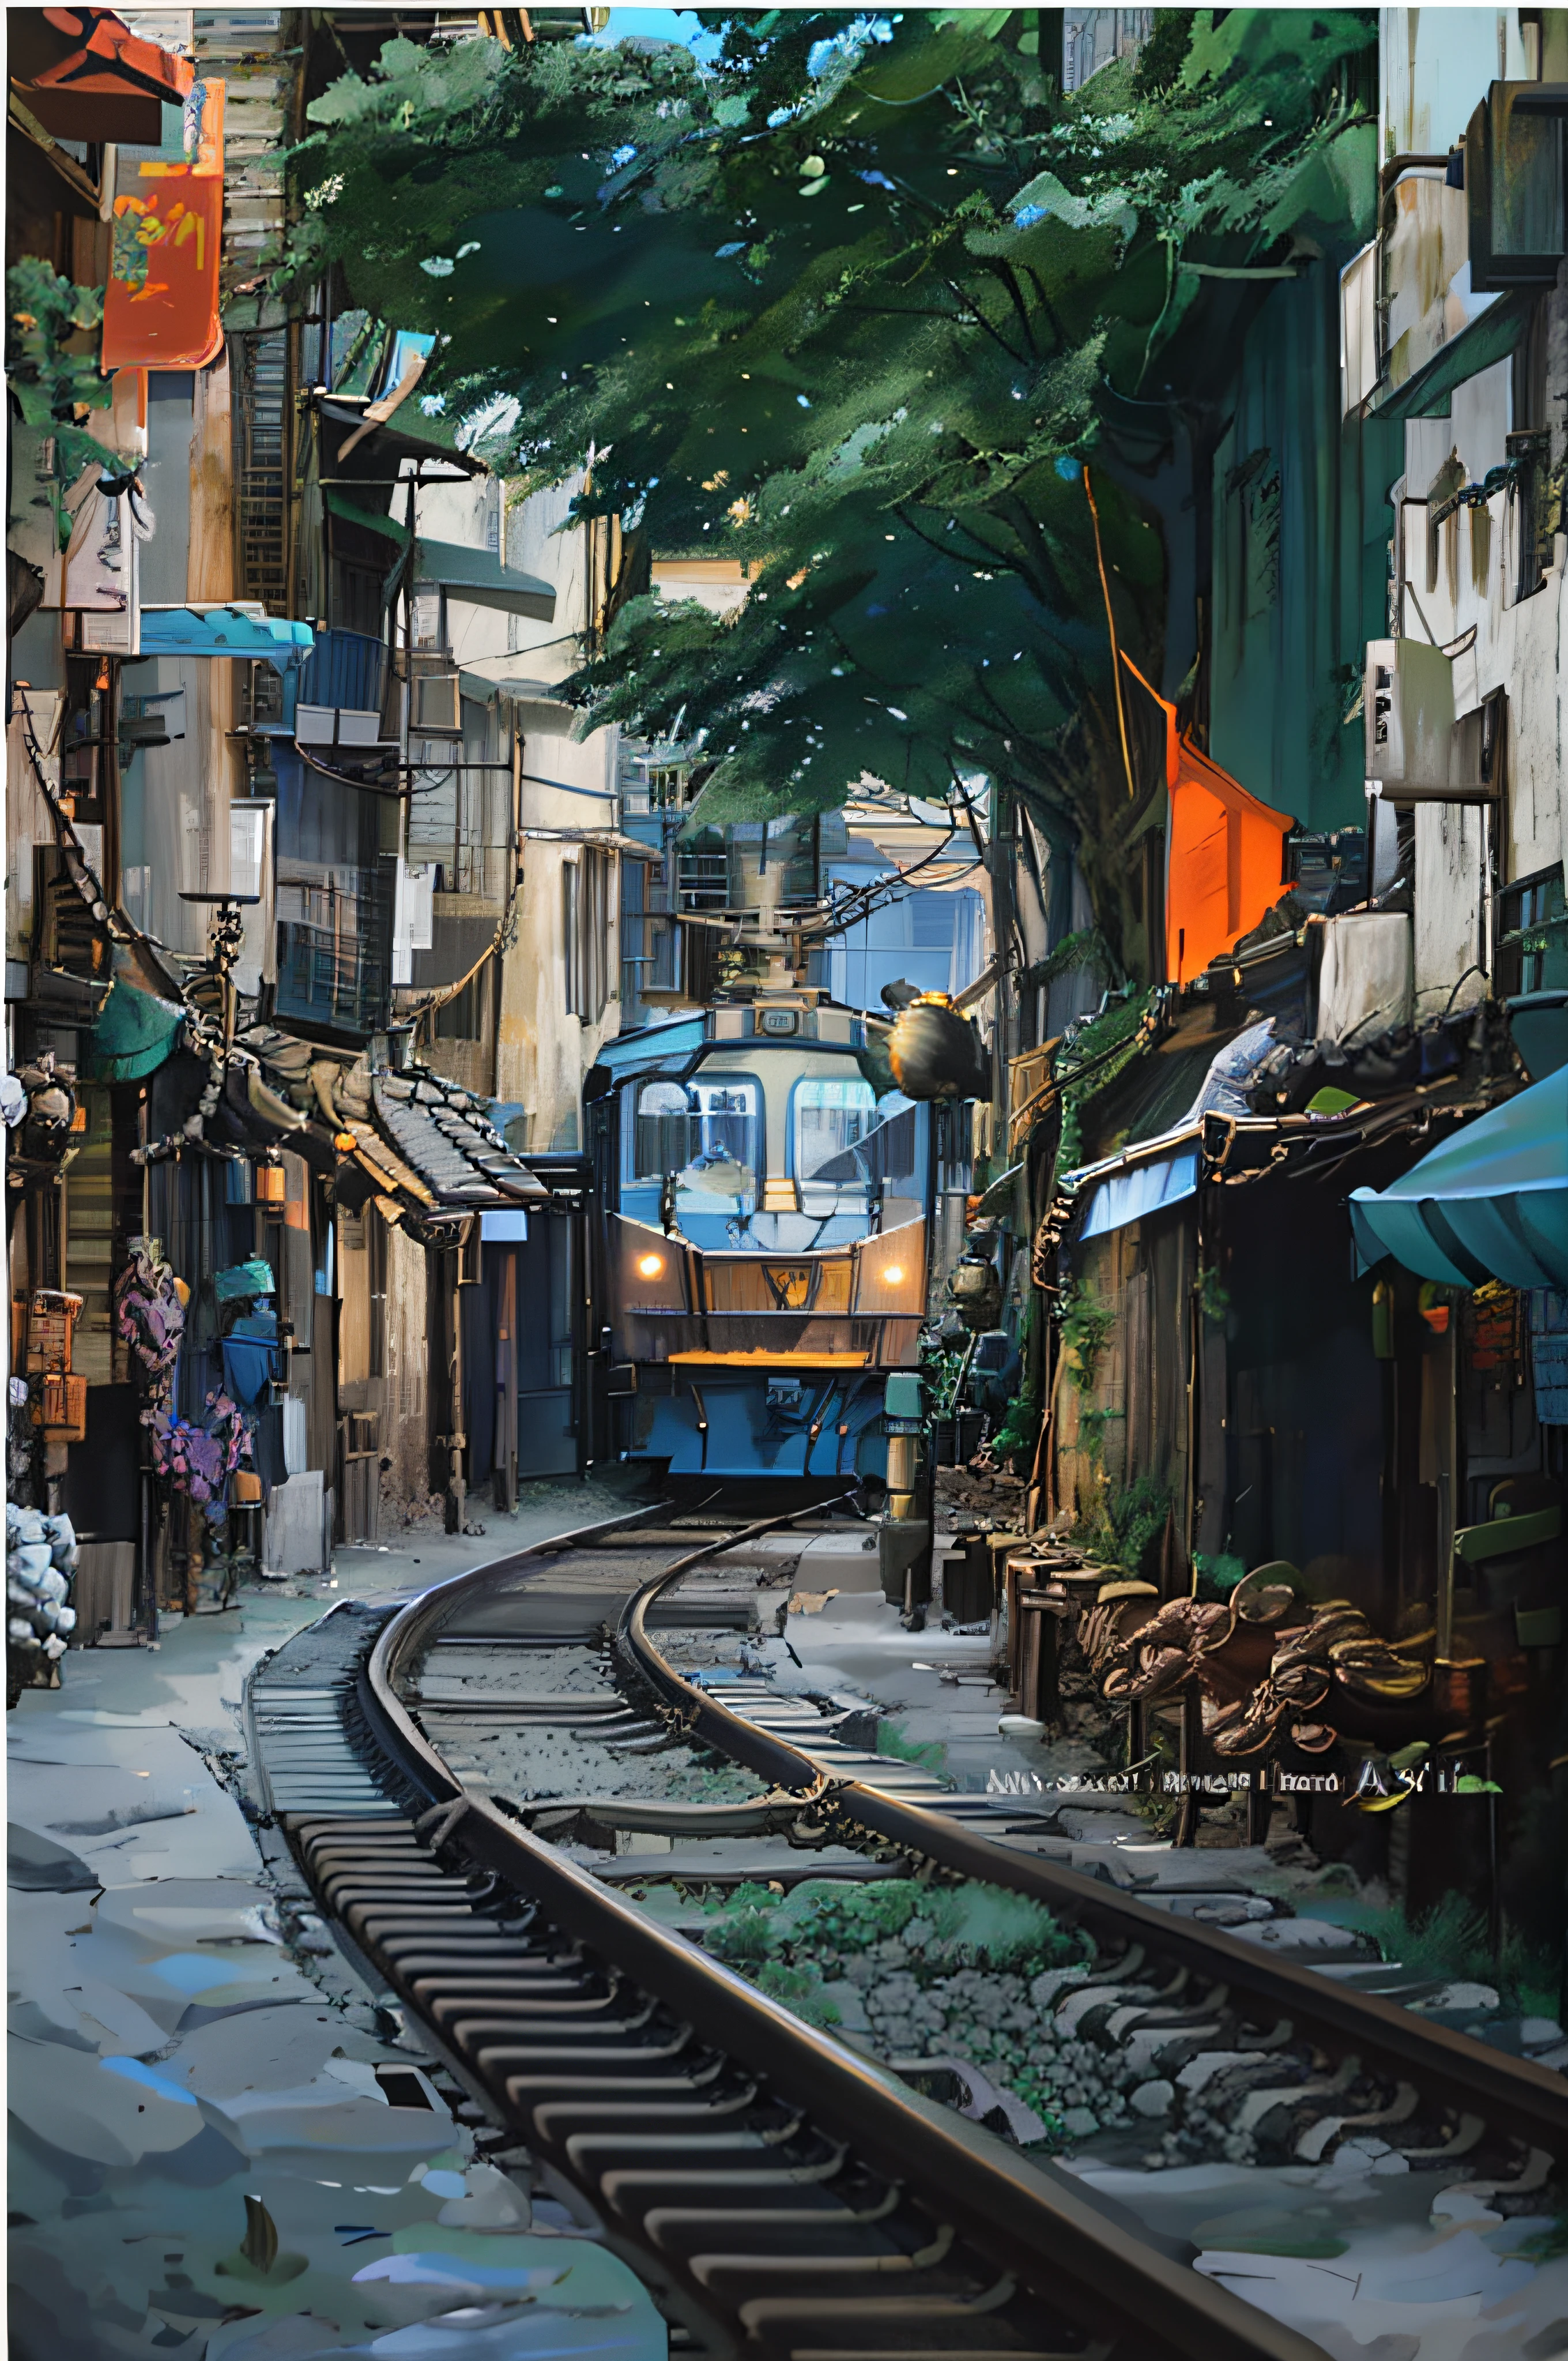 arafed train on tracks in a narrow alley with people walking on the side, inspired by Steve McCurry, 🚿🗝📝, by irakli nadar, style steve mccurry, train, street tram, by Géza Mészöly, by Ni Yuanlu, charging through city, very very surreal, hyperealistic photo